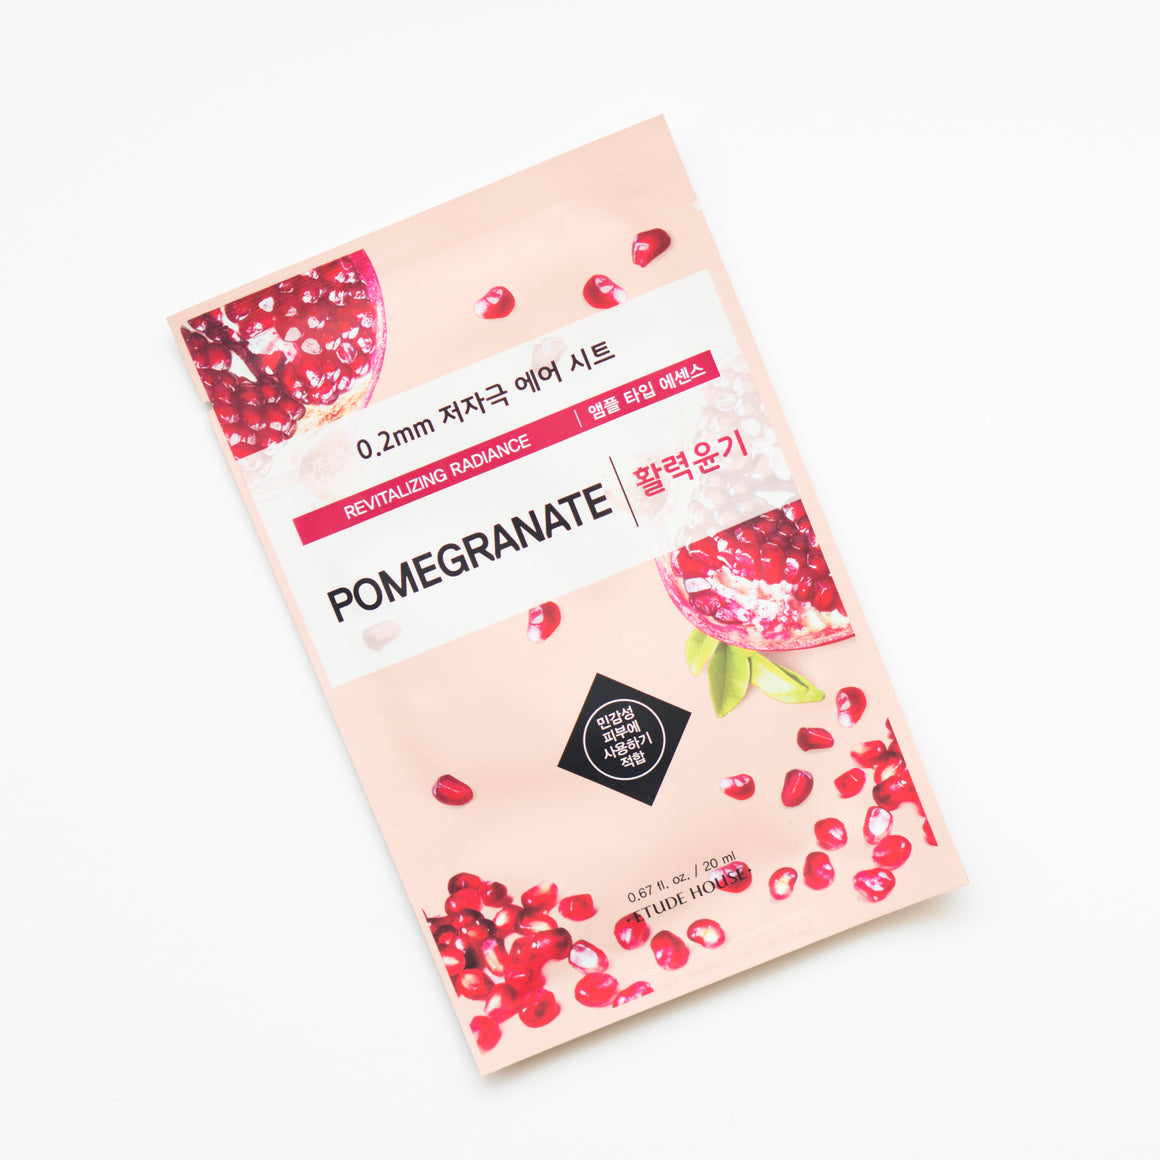 ETUDE HOUSE 0.2 Therapy Air Mask - Pomegranate